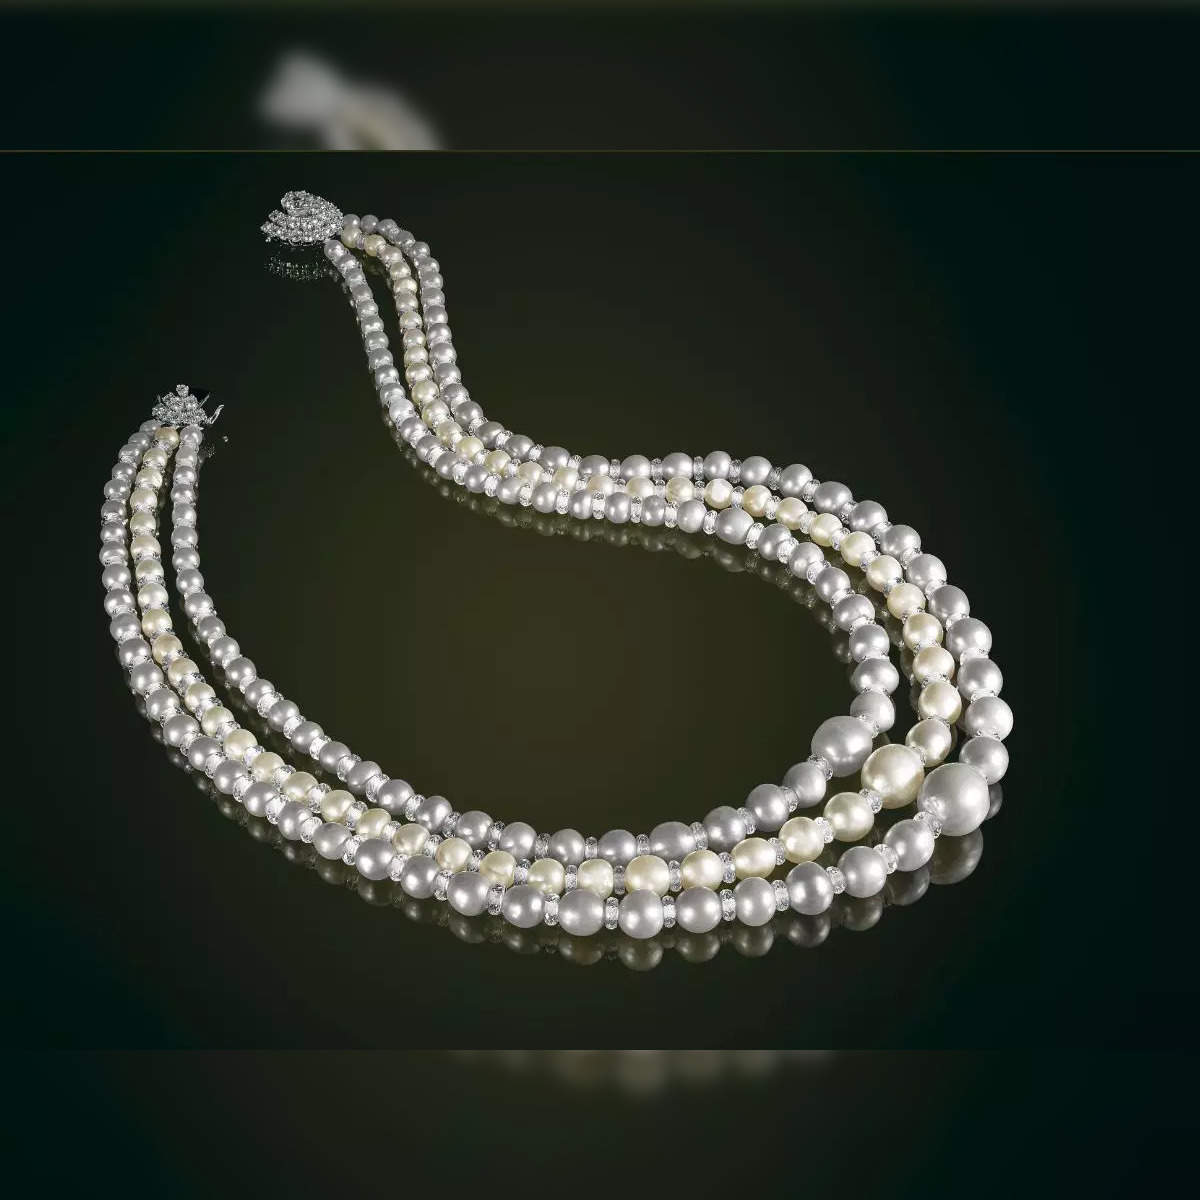 AstaGuru: Rare triple-strand pearl necklace fetches Rs 6.2 cr at